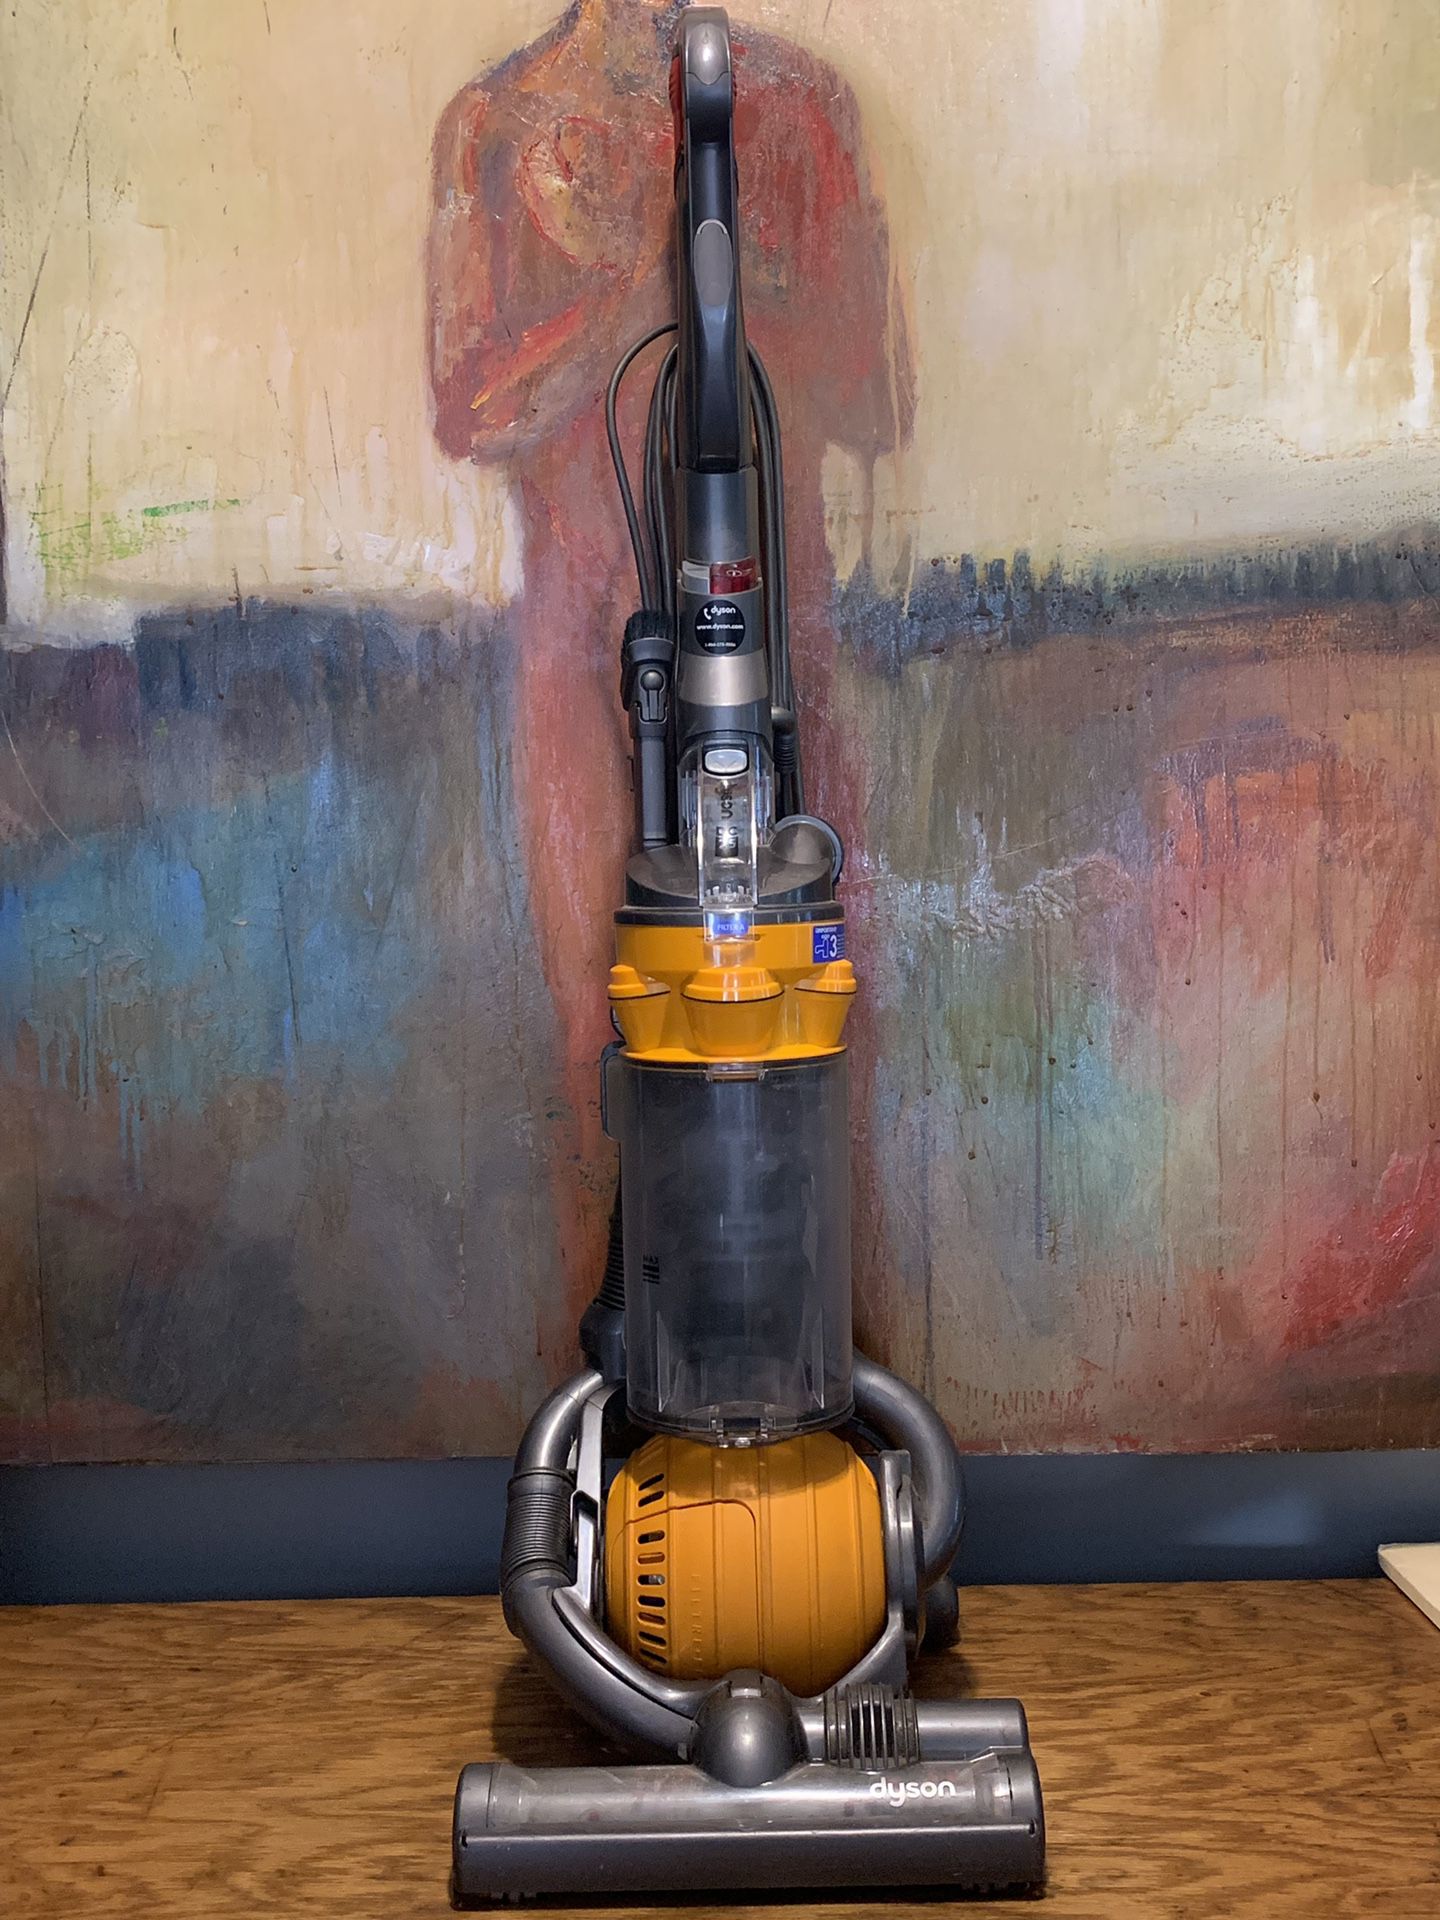 Dyson dc25 vaccum works awesome